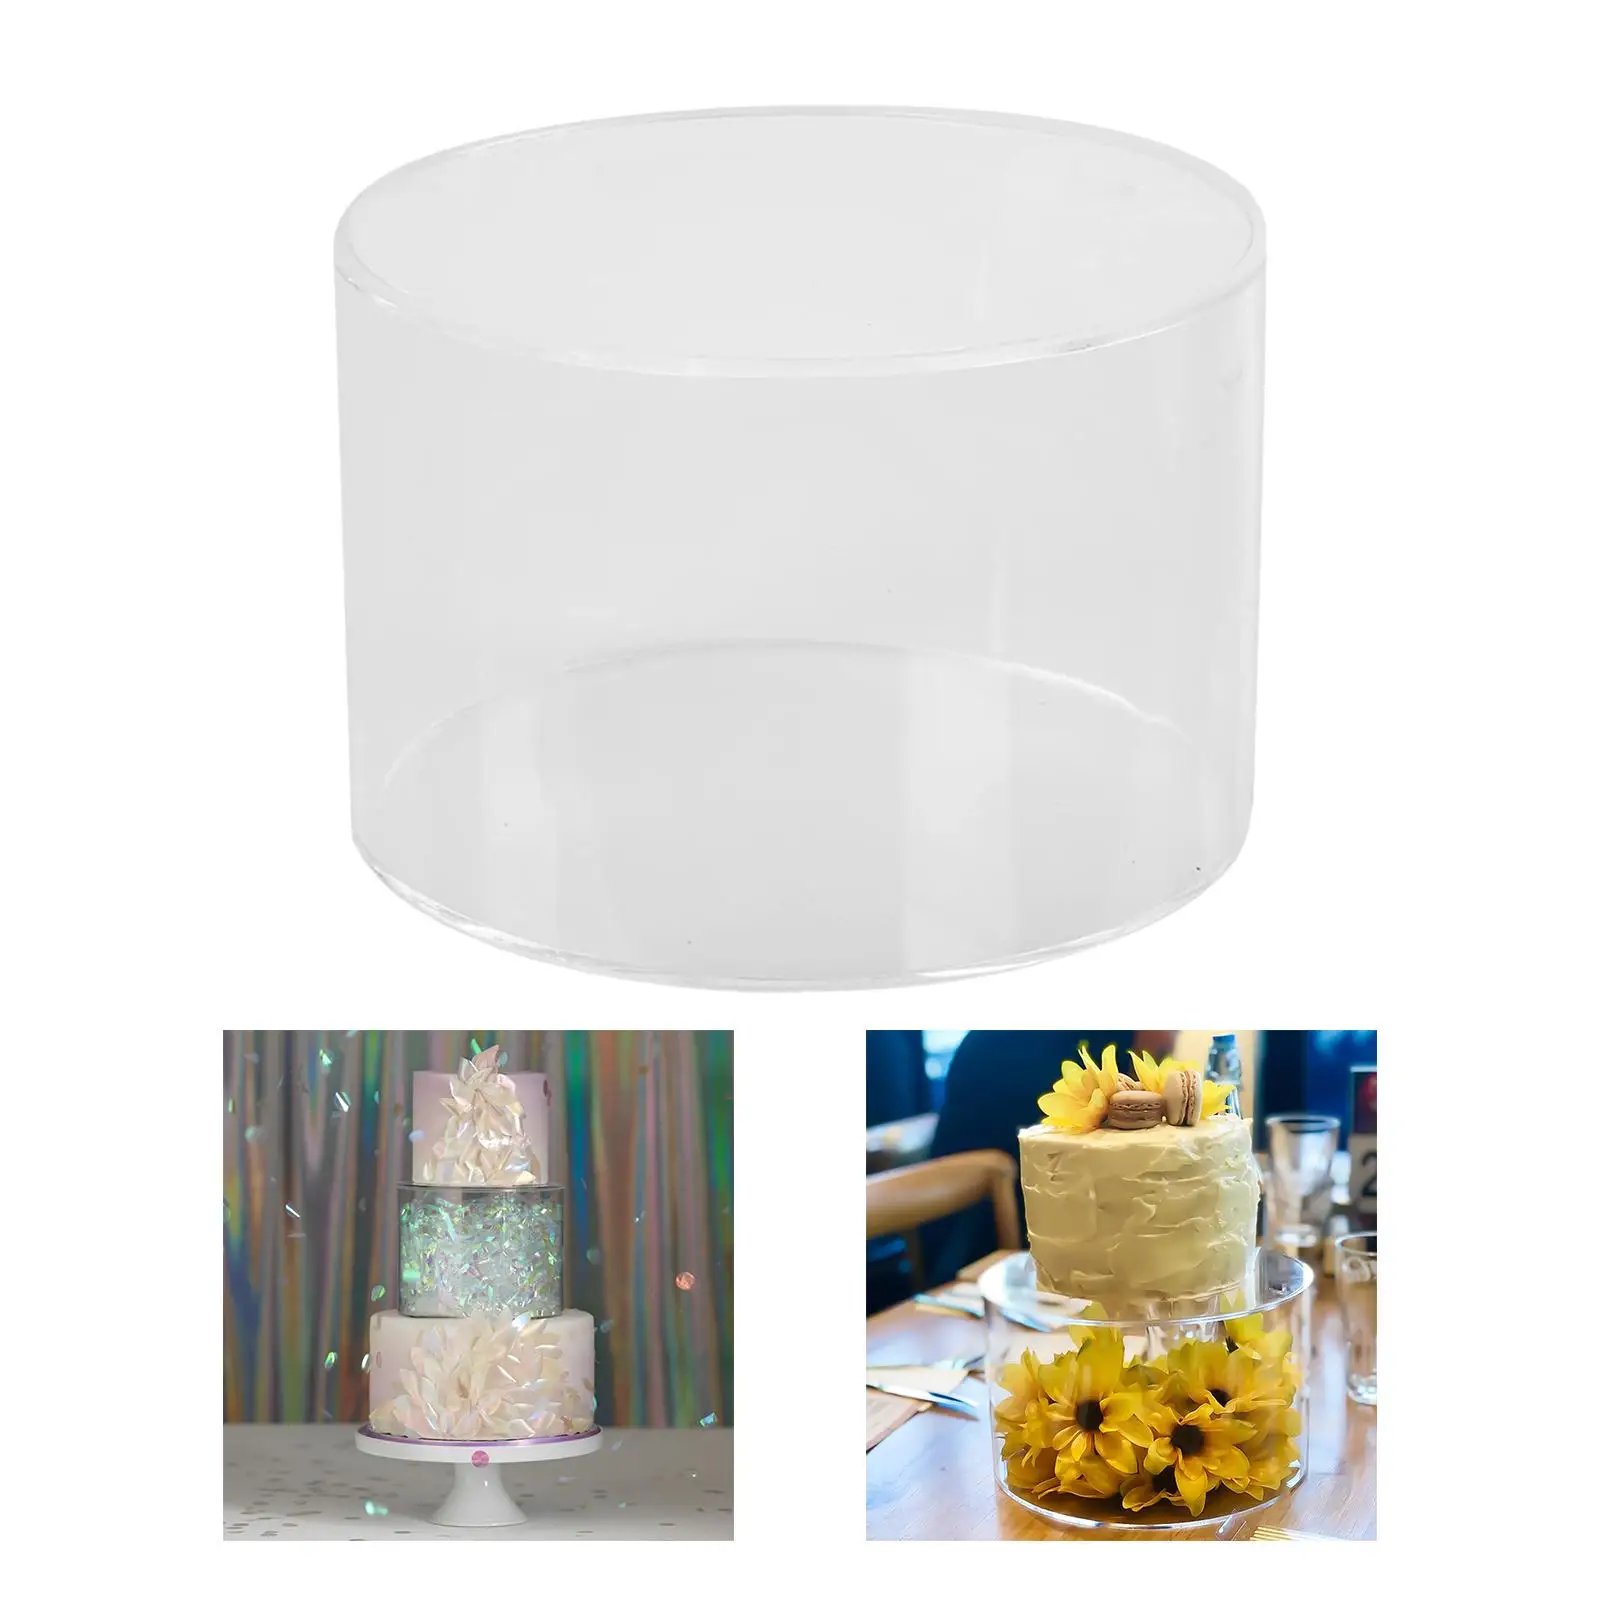 Cylinder Display Riser Round Cake Tool Decorative Centerpiece Decorative Supplies DIY Stand Riser Cake Dummy Cake Tier for Party